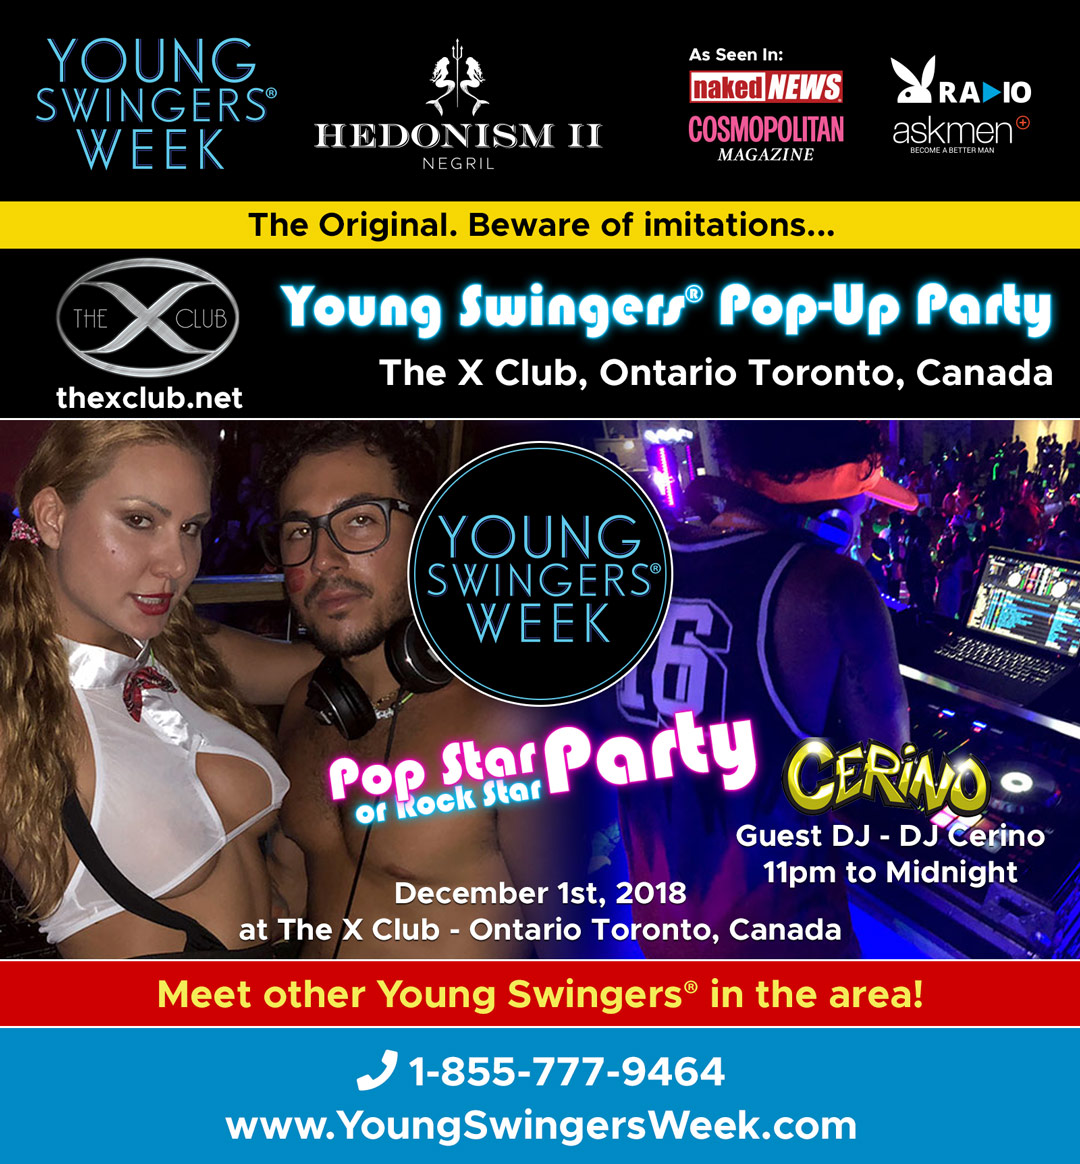 Young Swingers® Pop-Up Party at The X Club, Canada Pop Star Night imagem